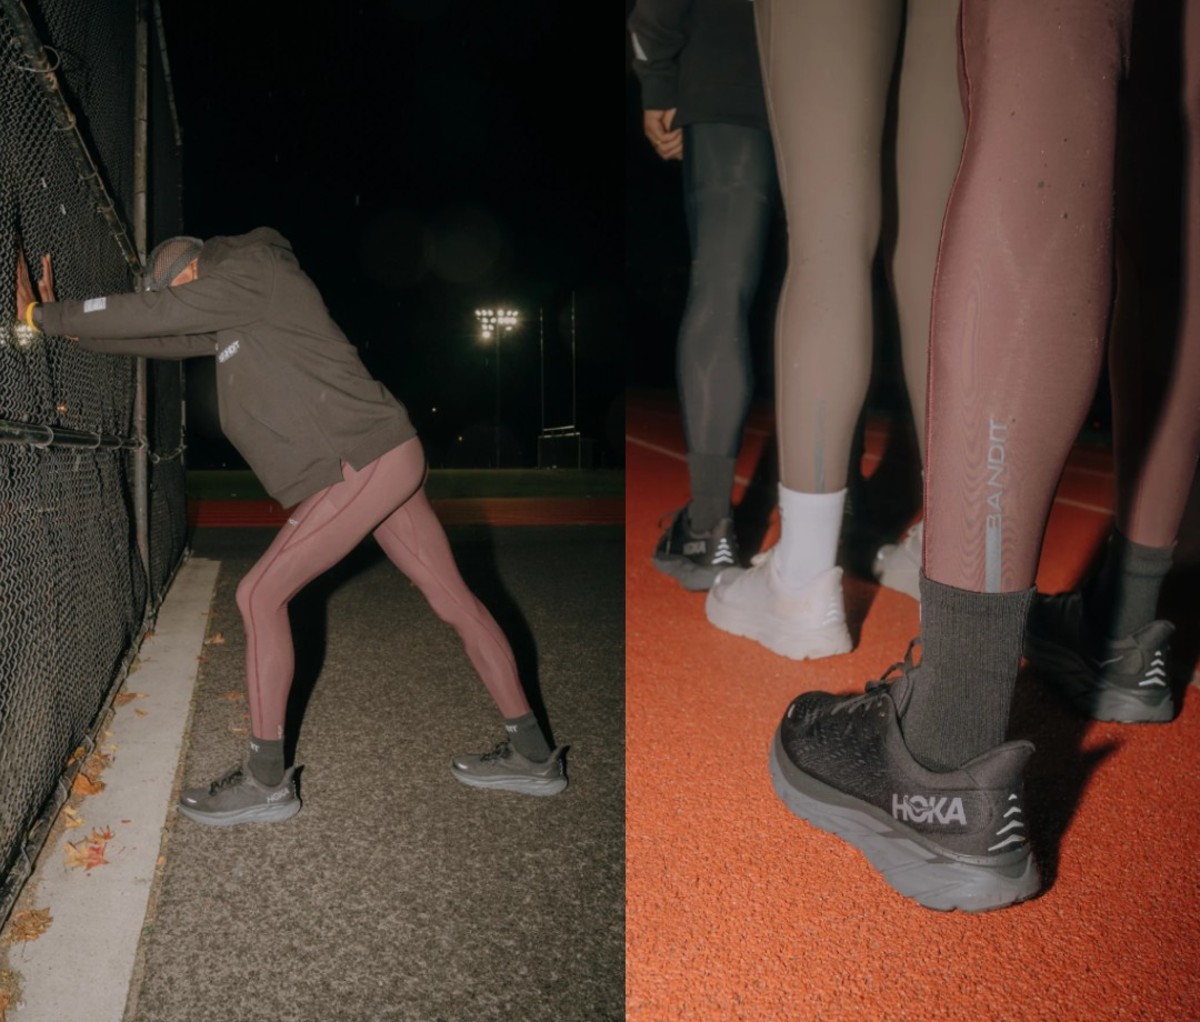 Left image shows Black man in cold-weather running apparel stretching hamstring against fence. Photo right shows three runners' lower legs in sneakers and training tights.